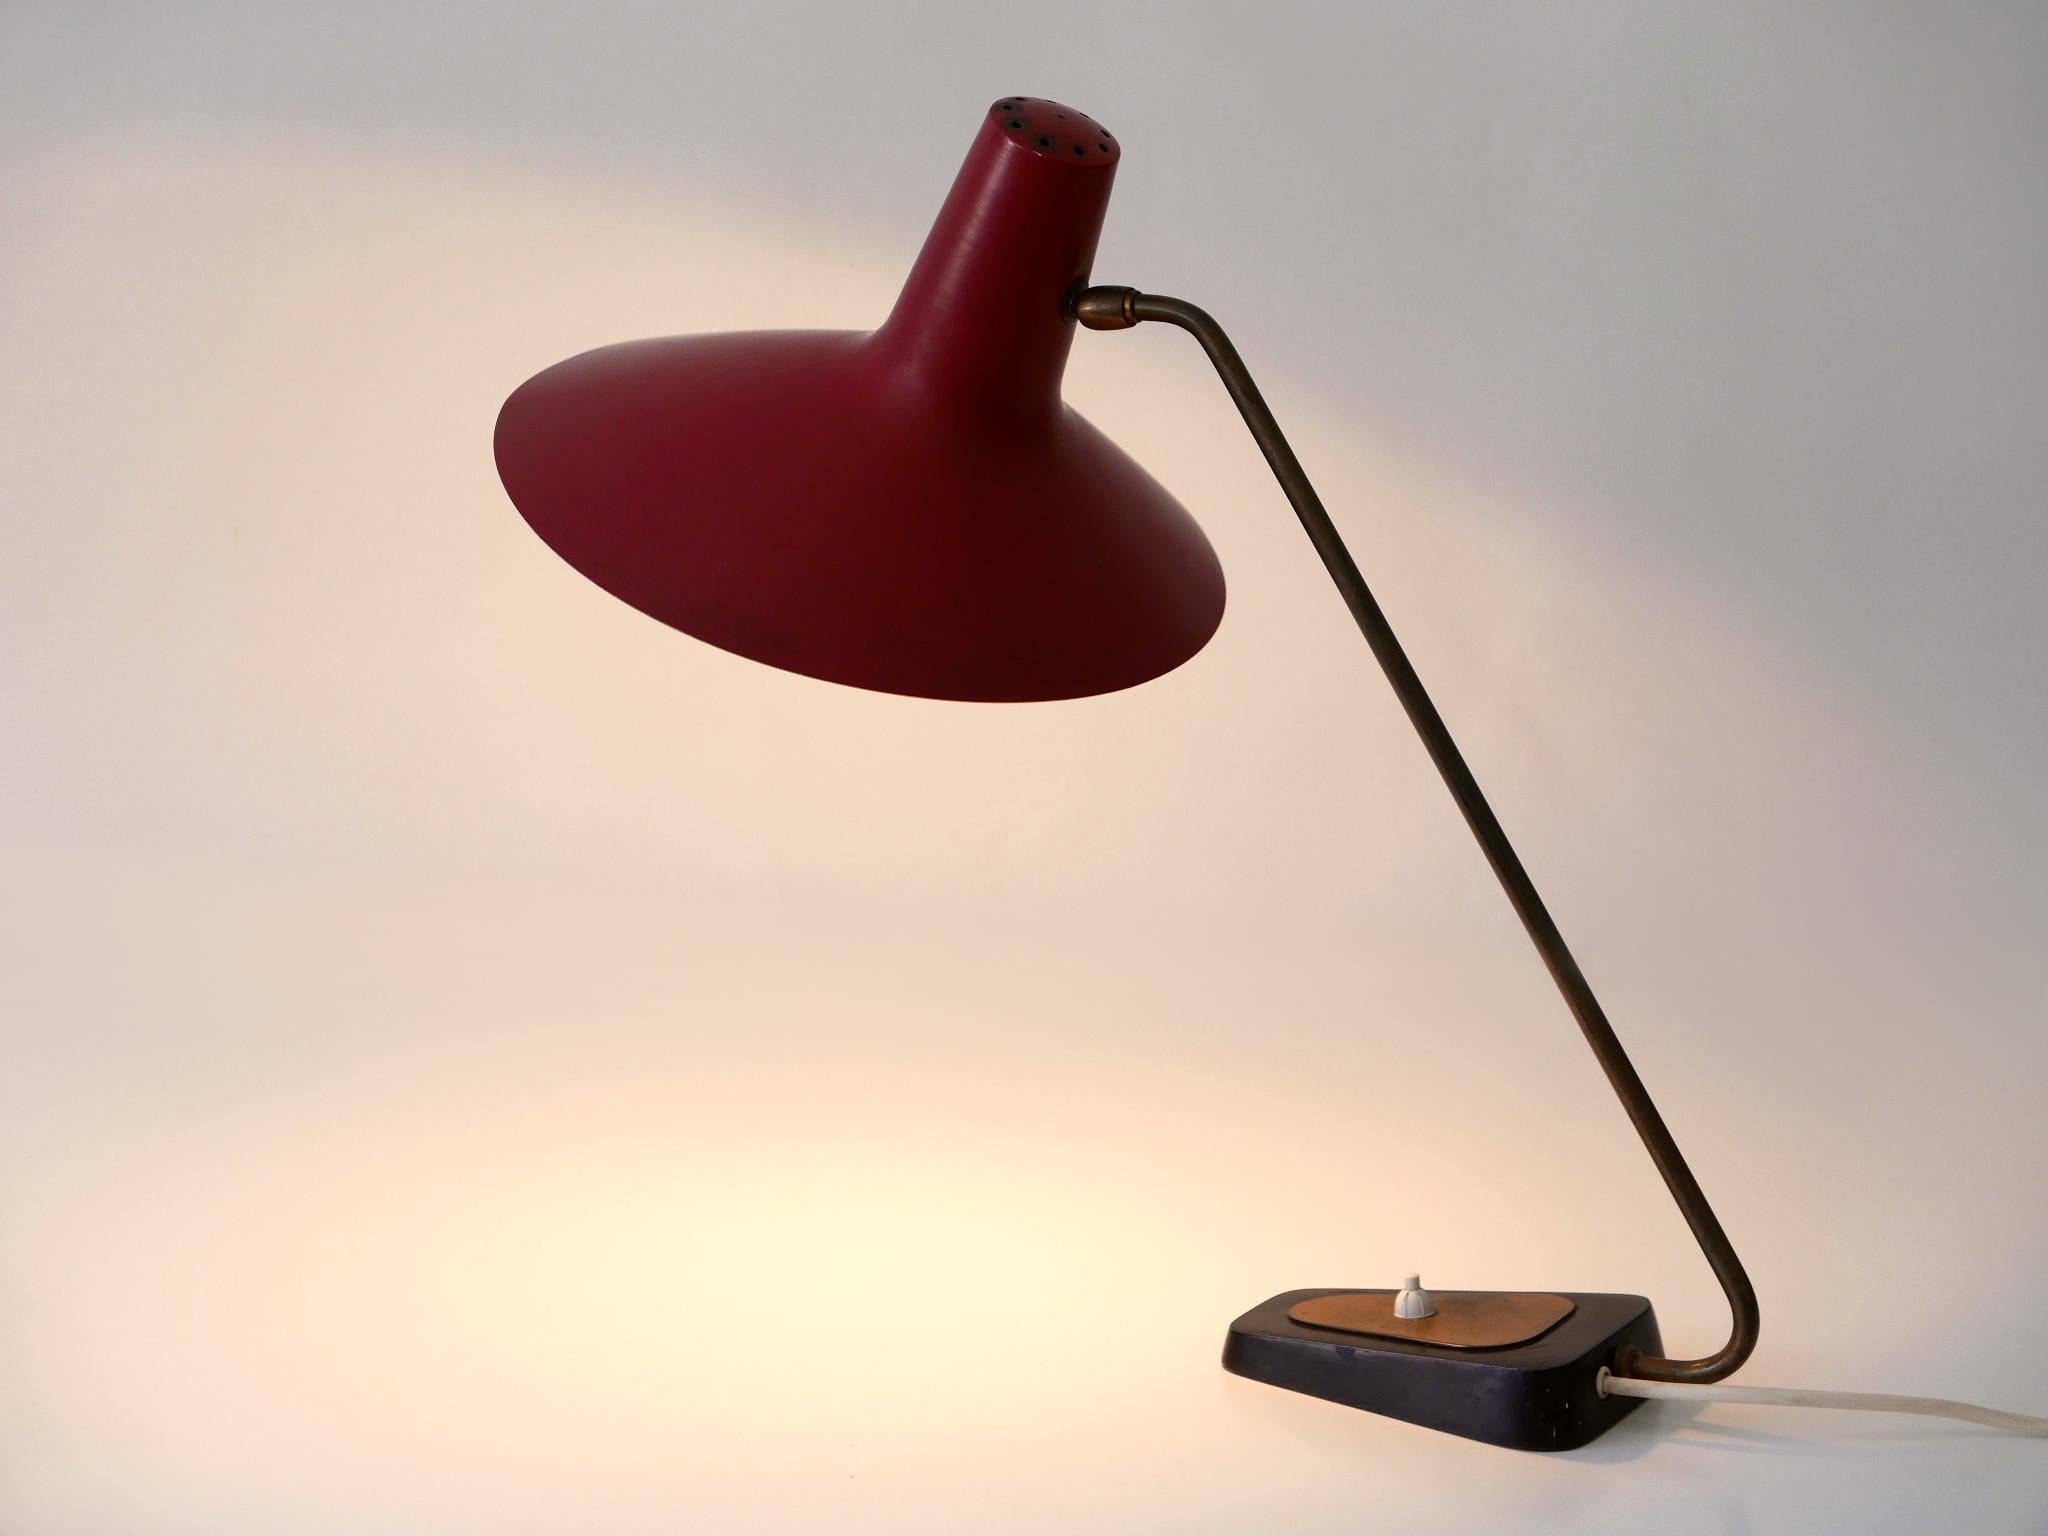 Exceptional Mid-Century Modern Table Lamp by Gebrüder Cosack Germany 1950s For Sale 12